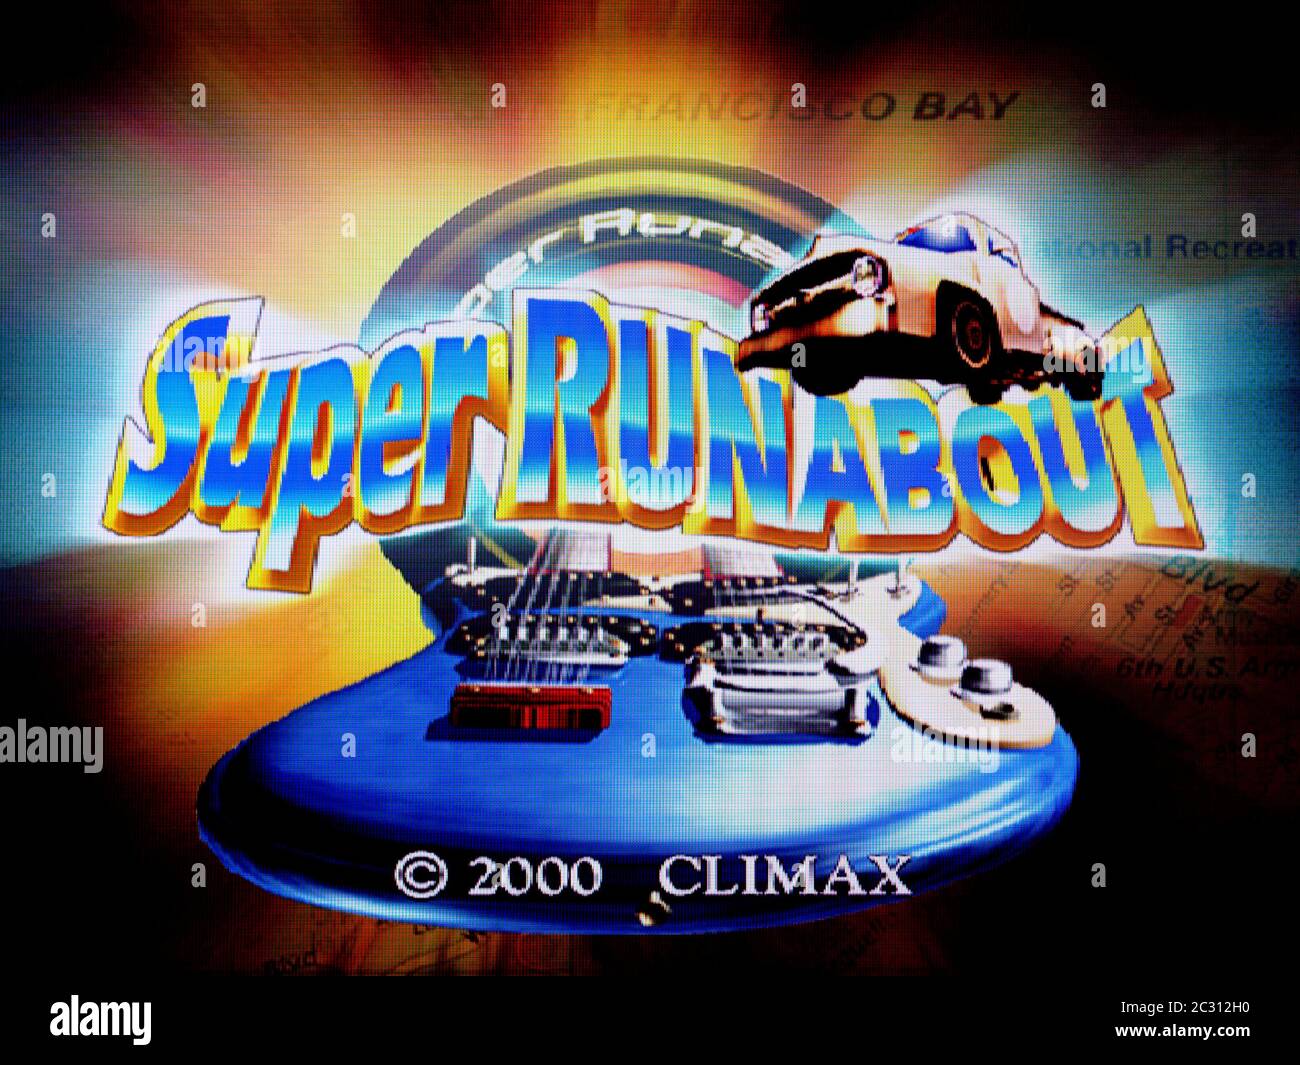 Super Runabout - Sega Dreamcast Videogame - Editorial use only Stock Photo